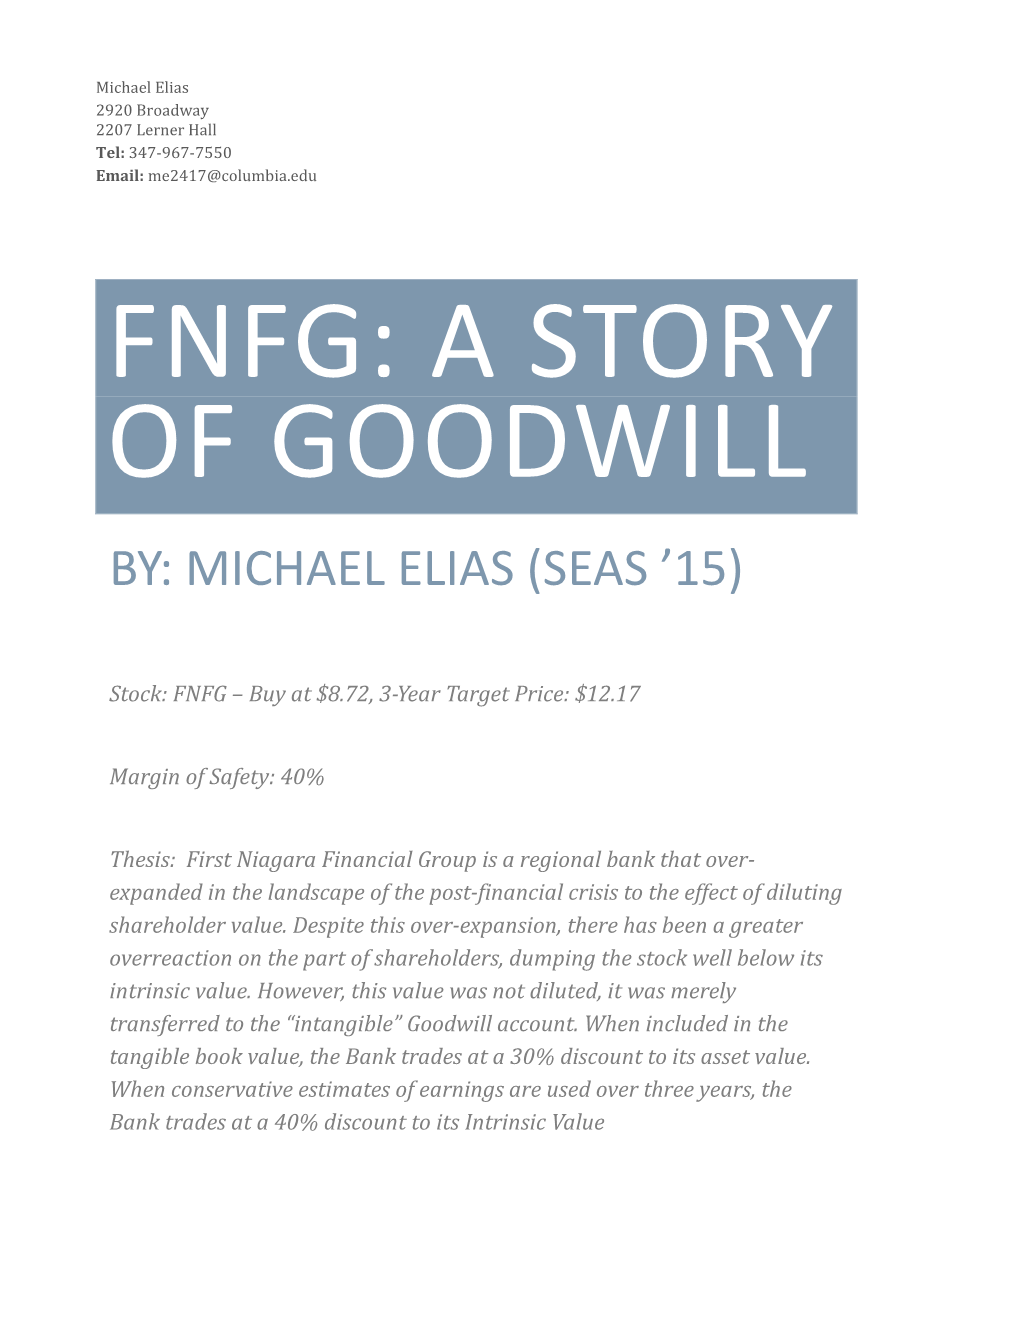 Fnfg: a Story of Goodwill By: Michael Elias (Seas ’15)